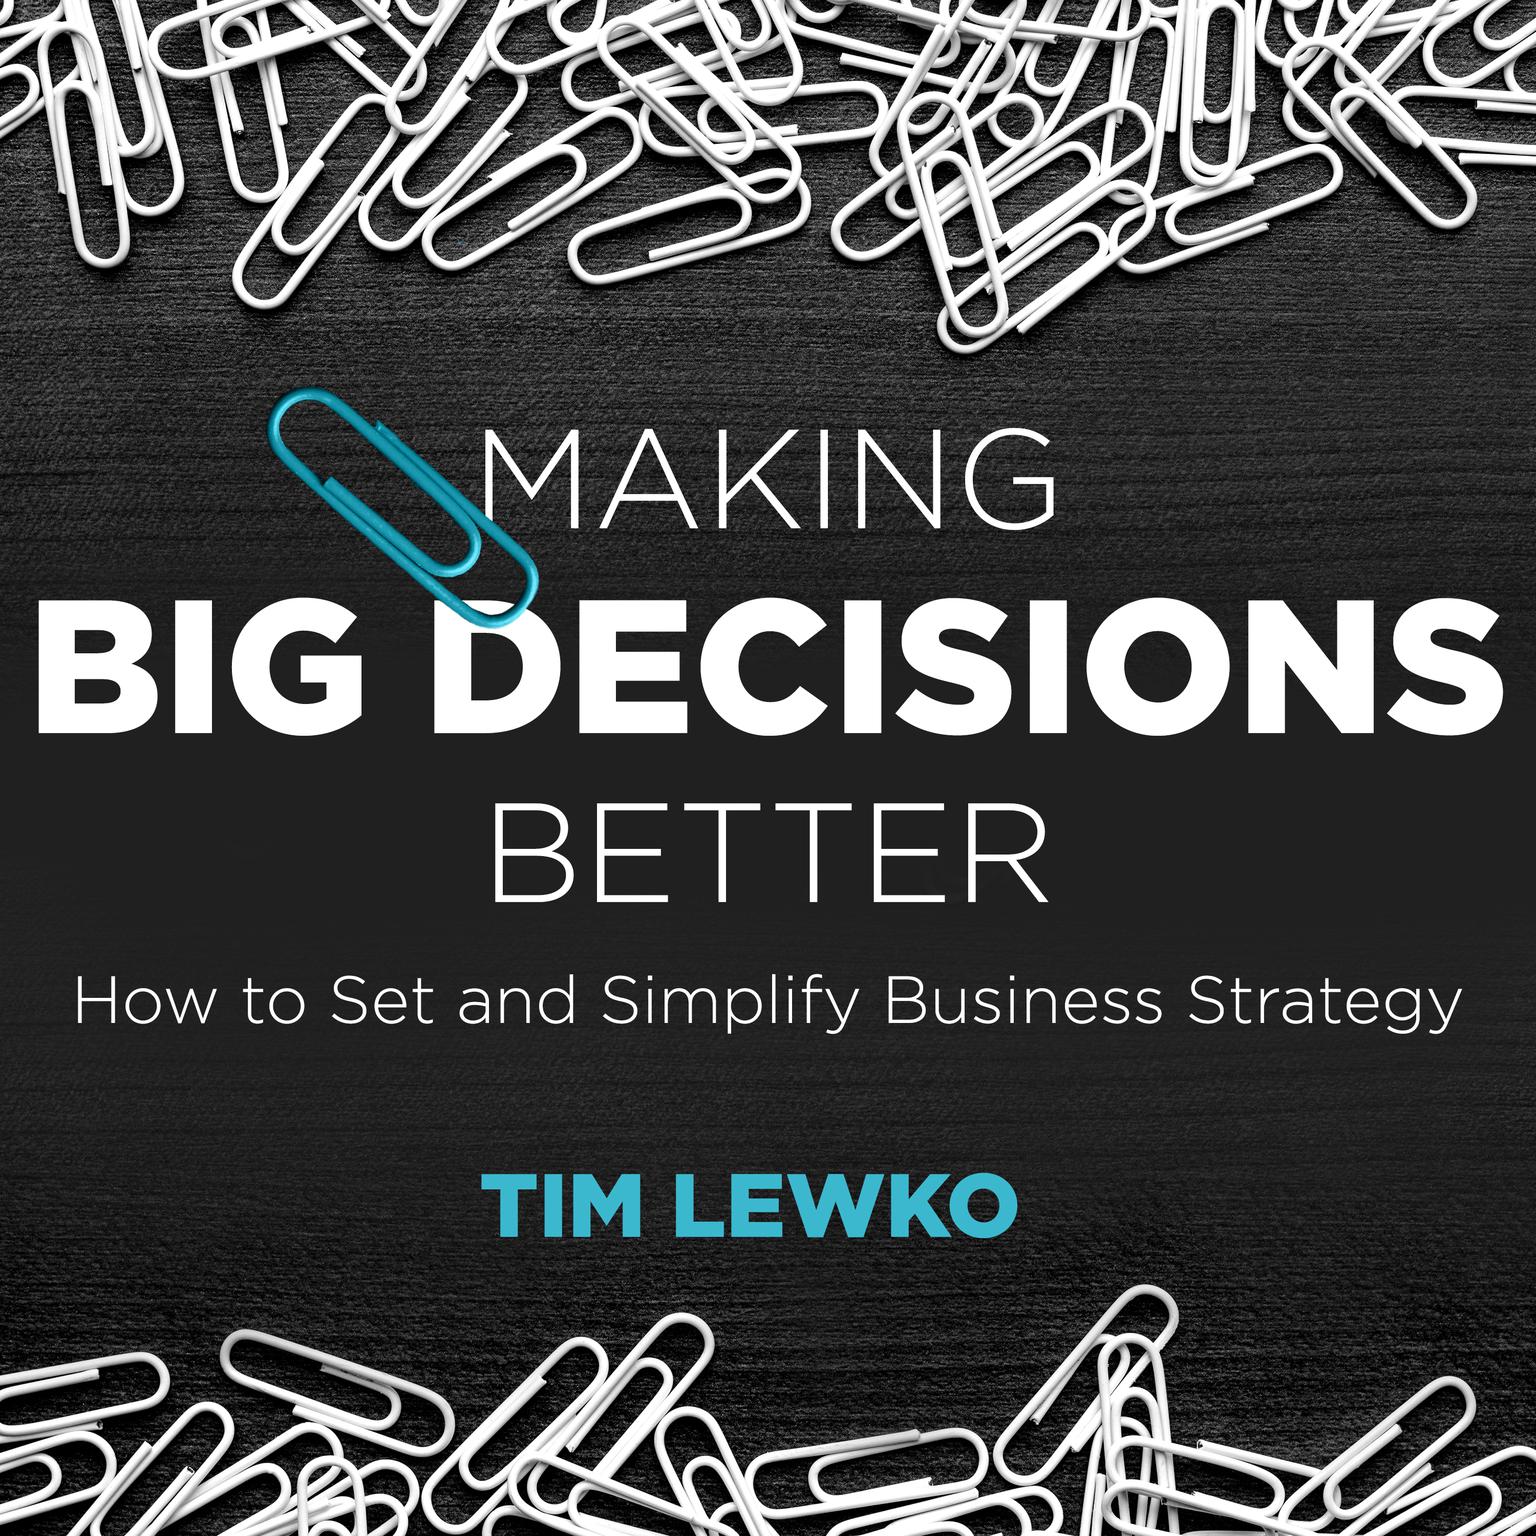 Making Big Decisions Better: How to Set and Simplify Business Strategy Audiobook, by Tim Lewko